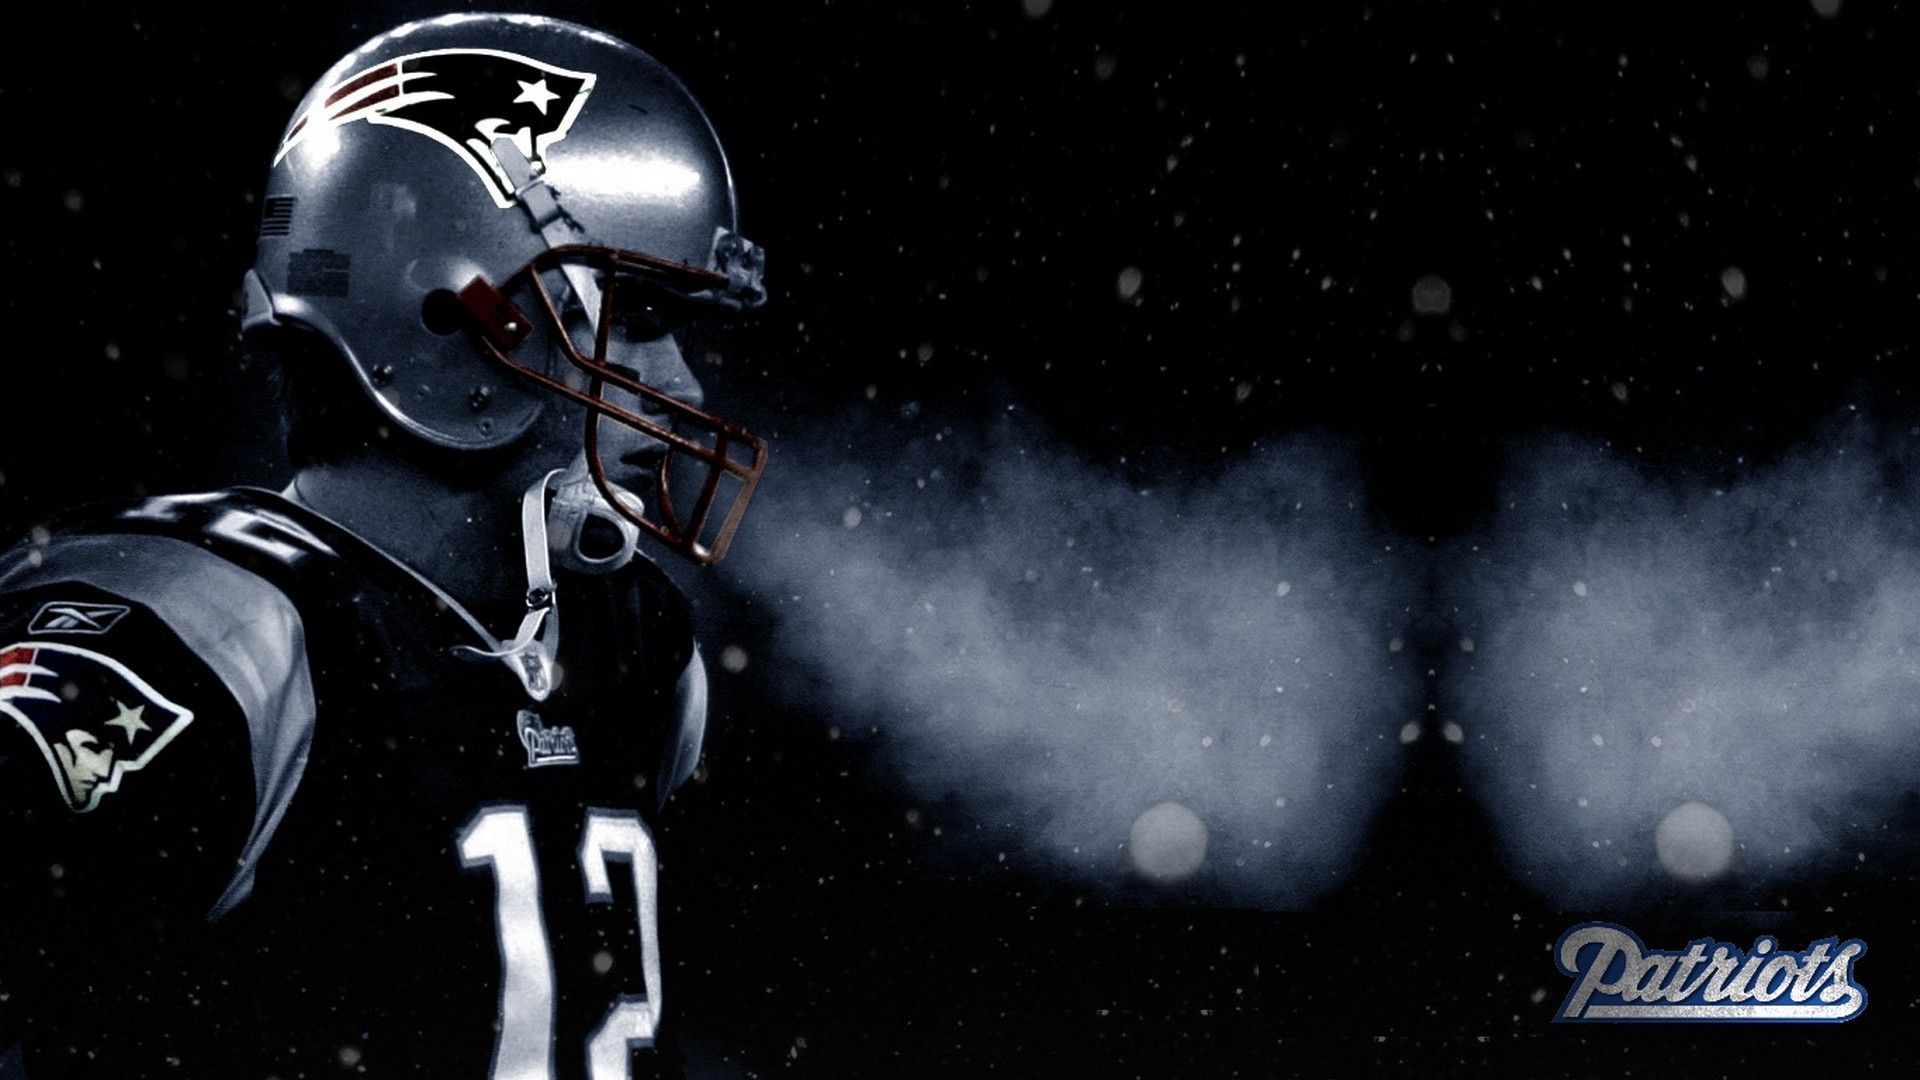 Wallpaper HD Tom Brady Super Bowl With Resolution 1920X1080 pixel. You can make this wallpaper for your Desktop Computer Backgrounds, Mac Wallpapers, Android Lock screen or iPhone Screensavers